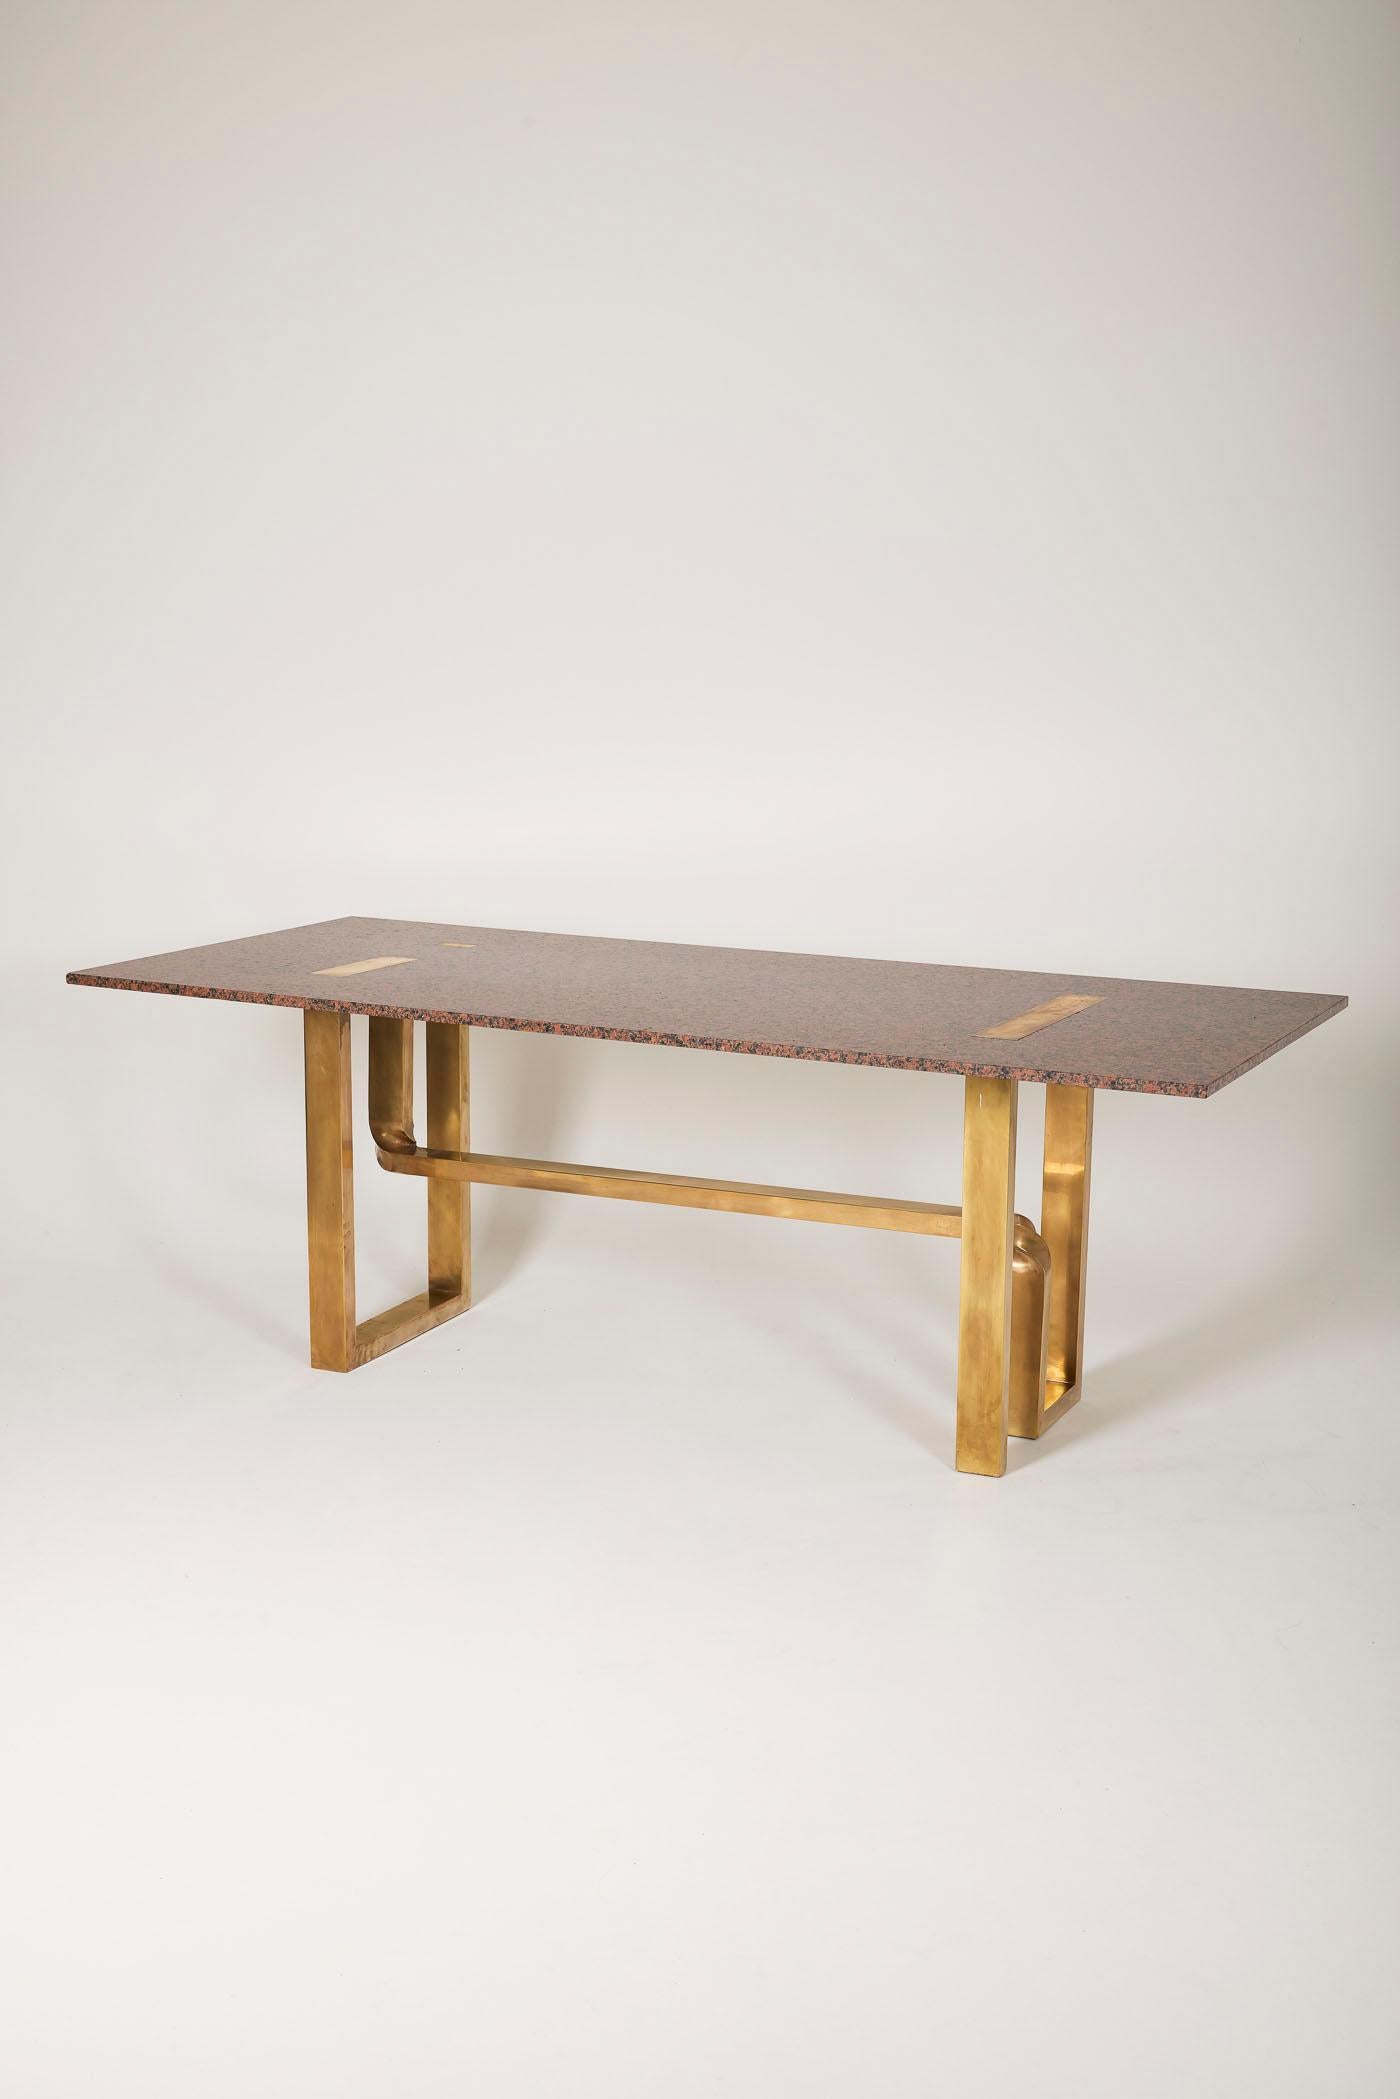 Large table by designer Alfredo Freda for Cittone Oggi. The tabletop is made of pink granite, and the base is in bronze with twisted arms. In good condition.
DV121